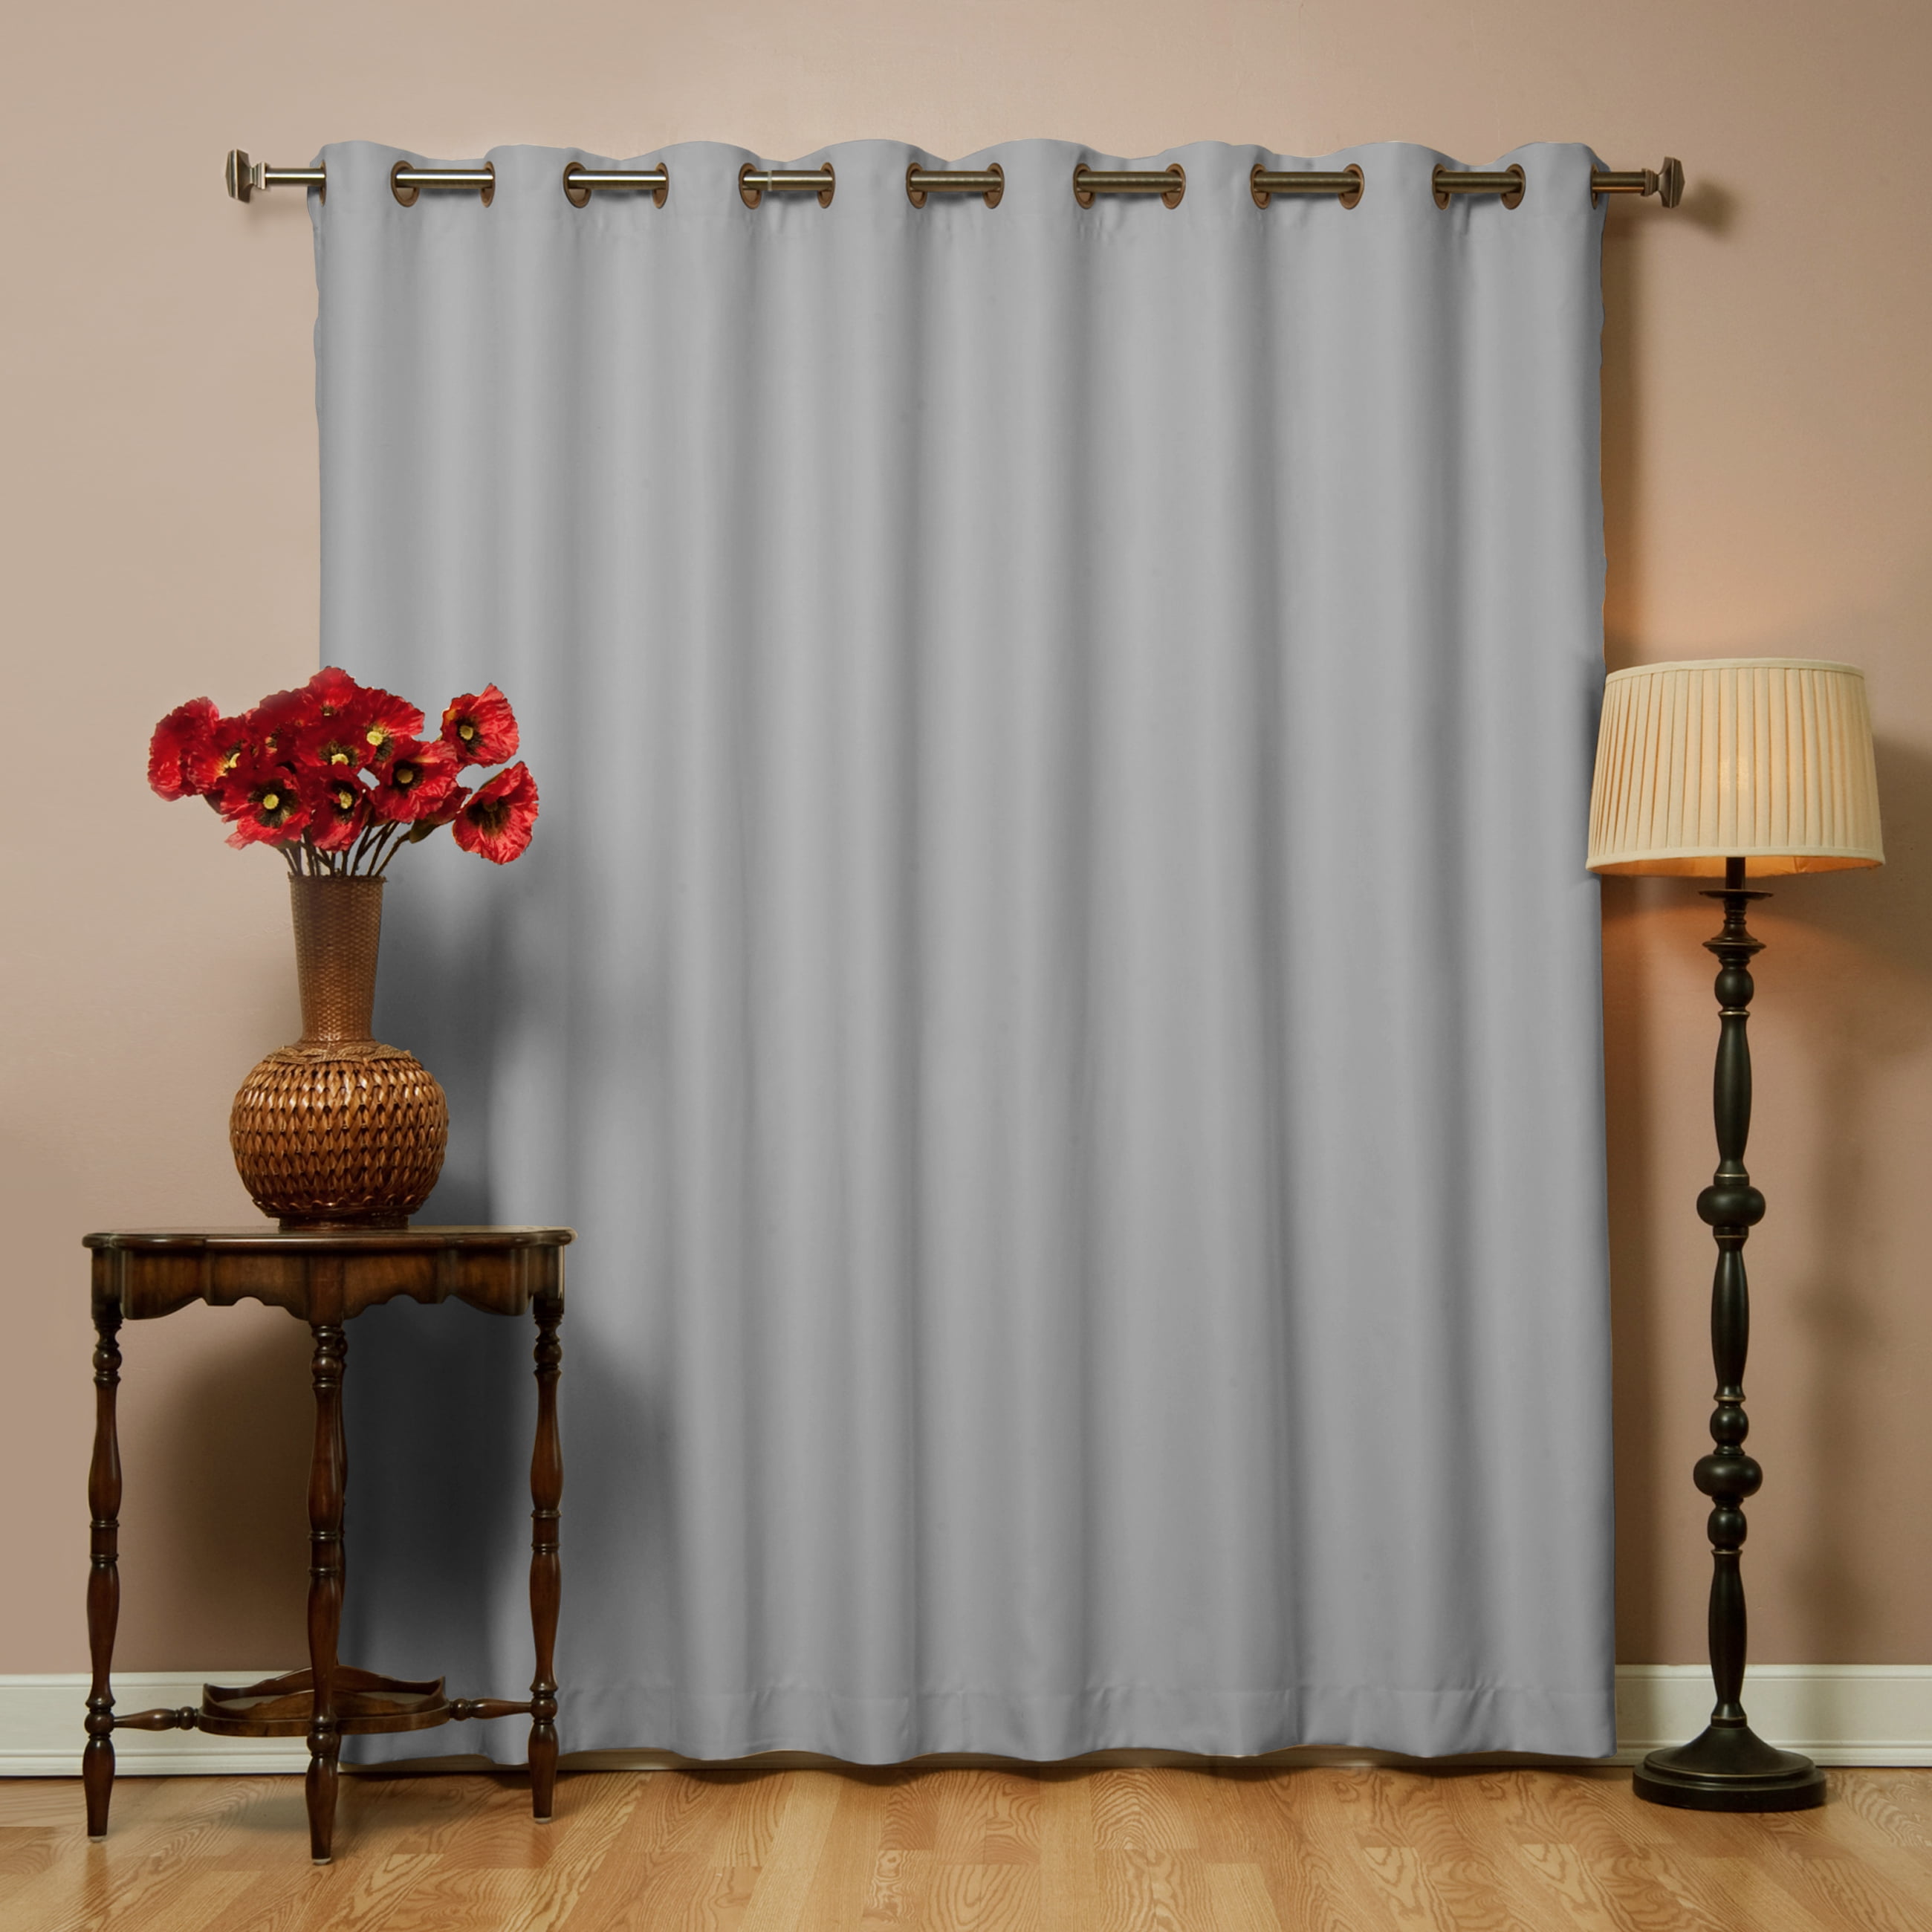 NARUTO0 90% Blackout Curtains Living Room Insulated Window Drapes Panels 2PCS 